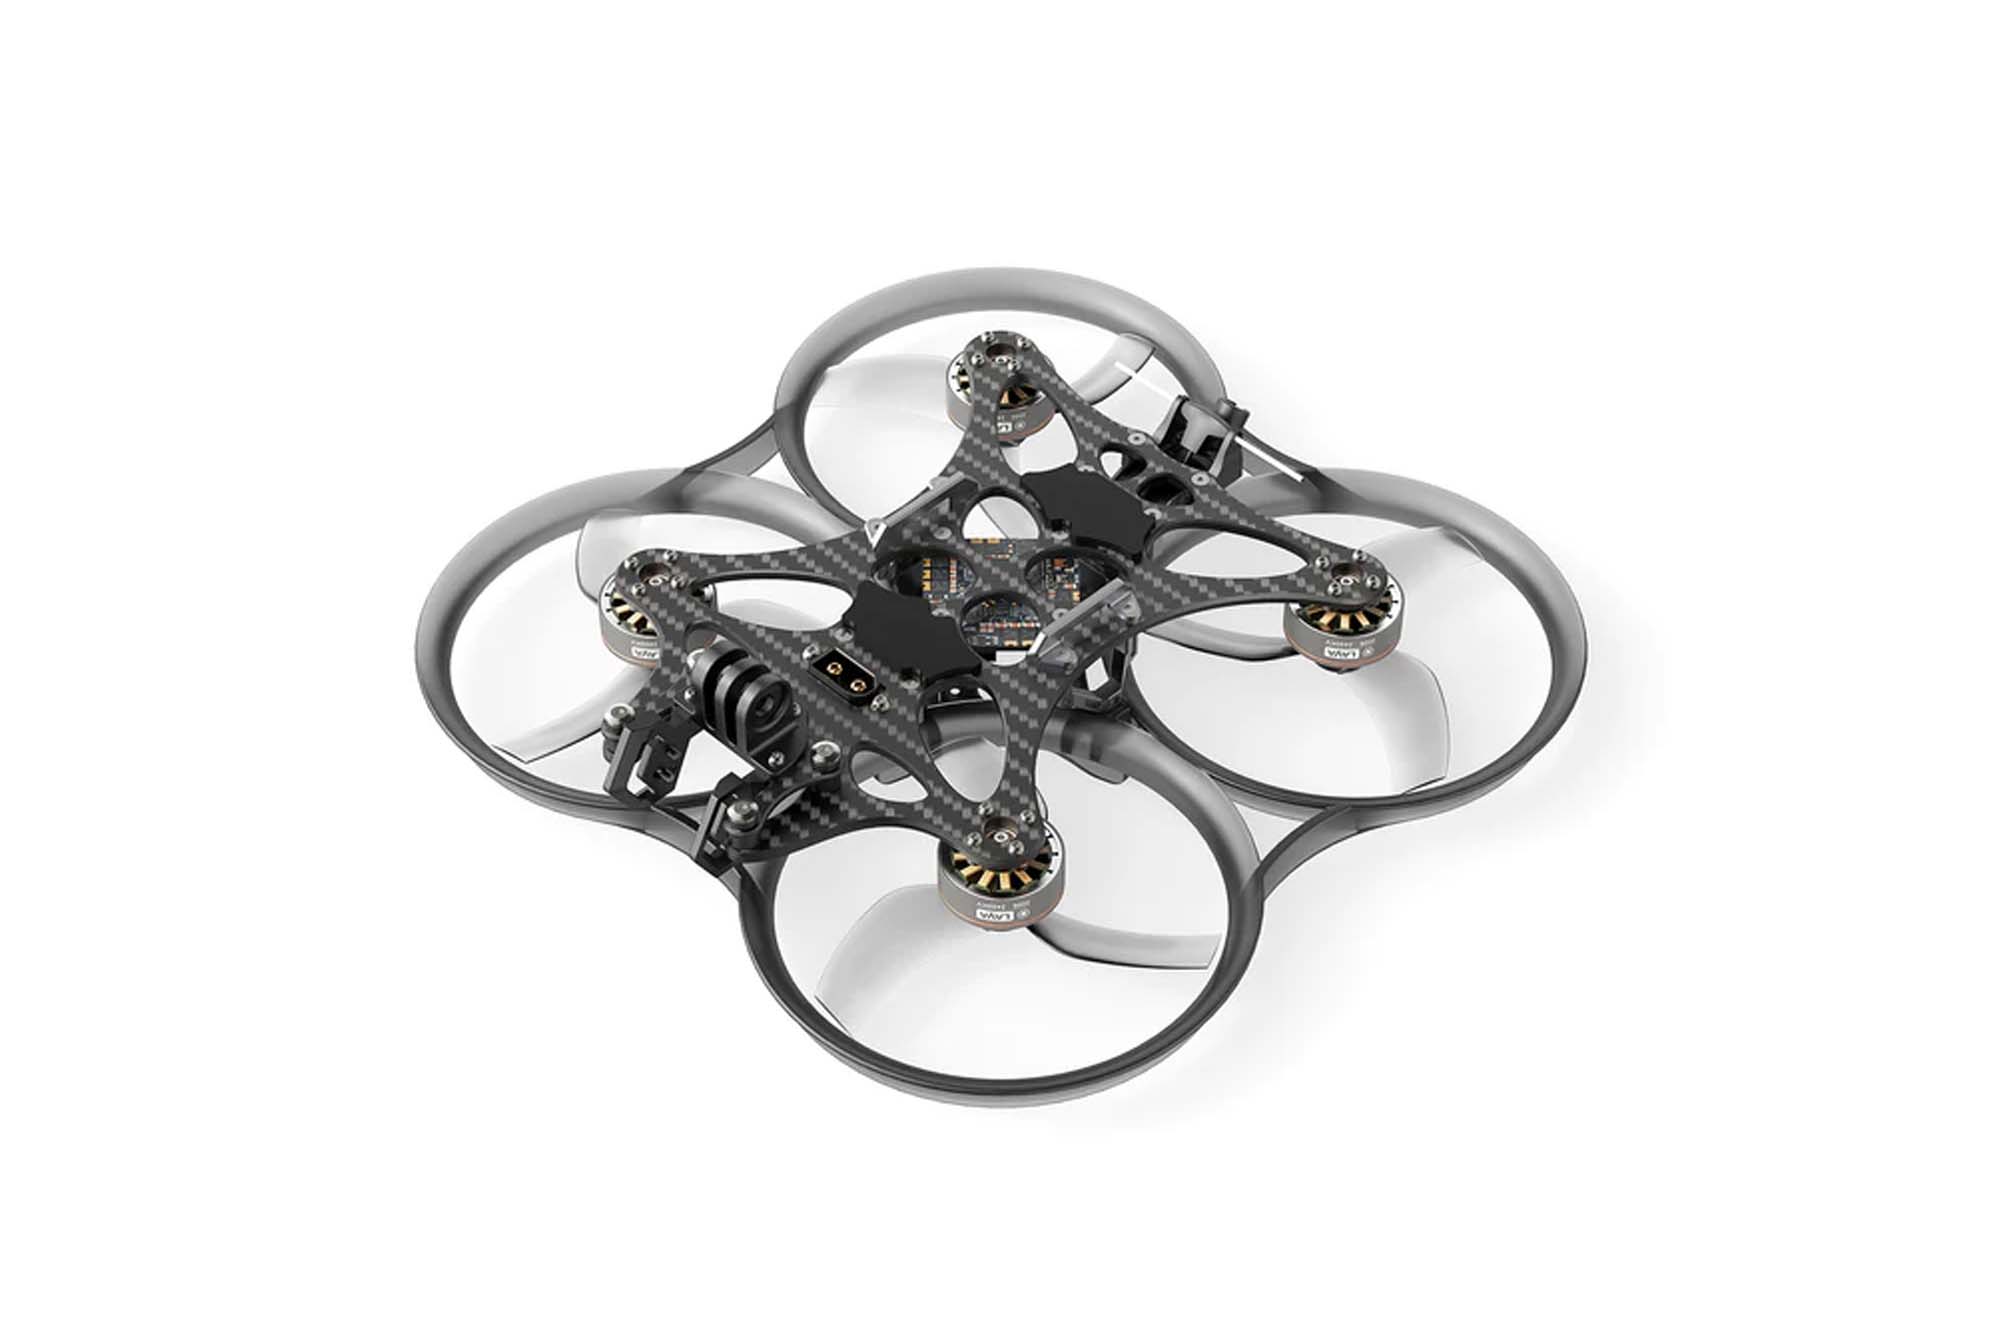 BetaFPV Pavo35 Brushless Whoop Quadcopter ELRS 2.4g HD Pro Kit -  BF-TOP